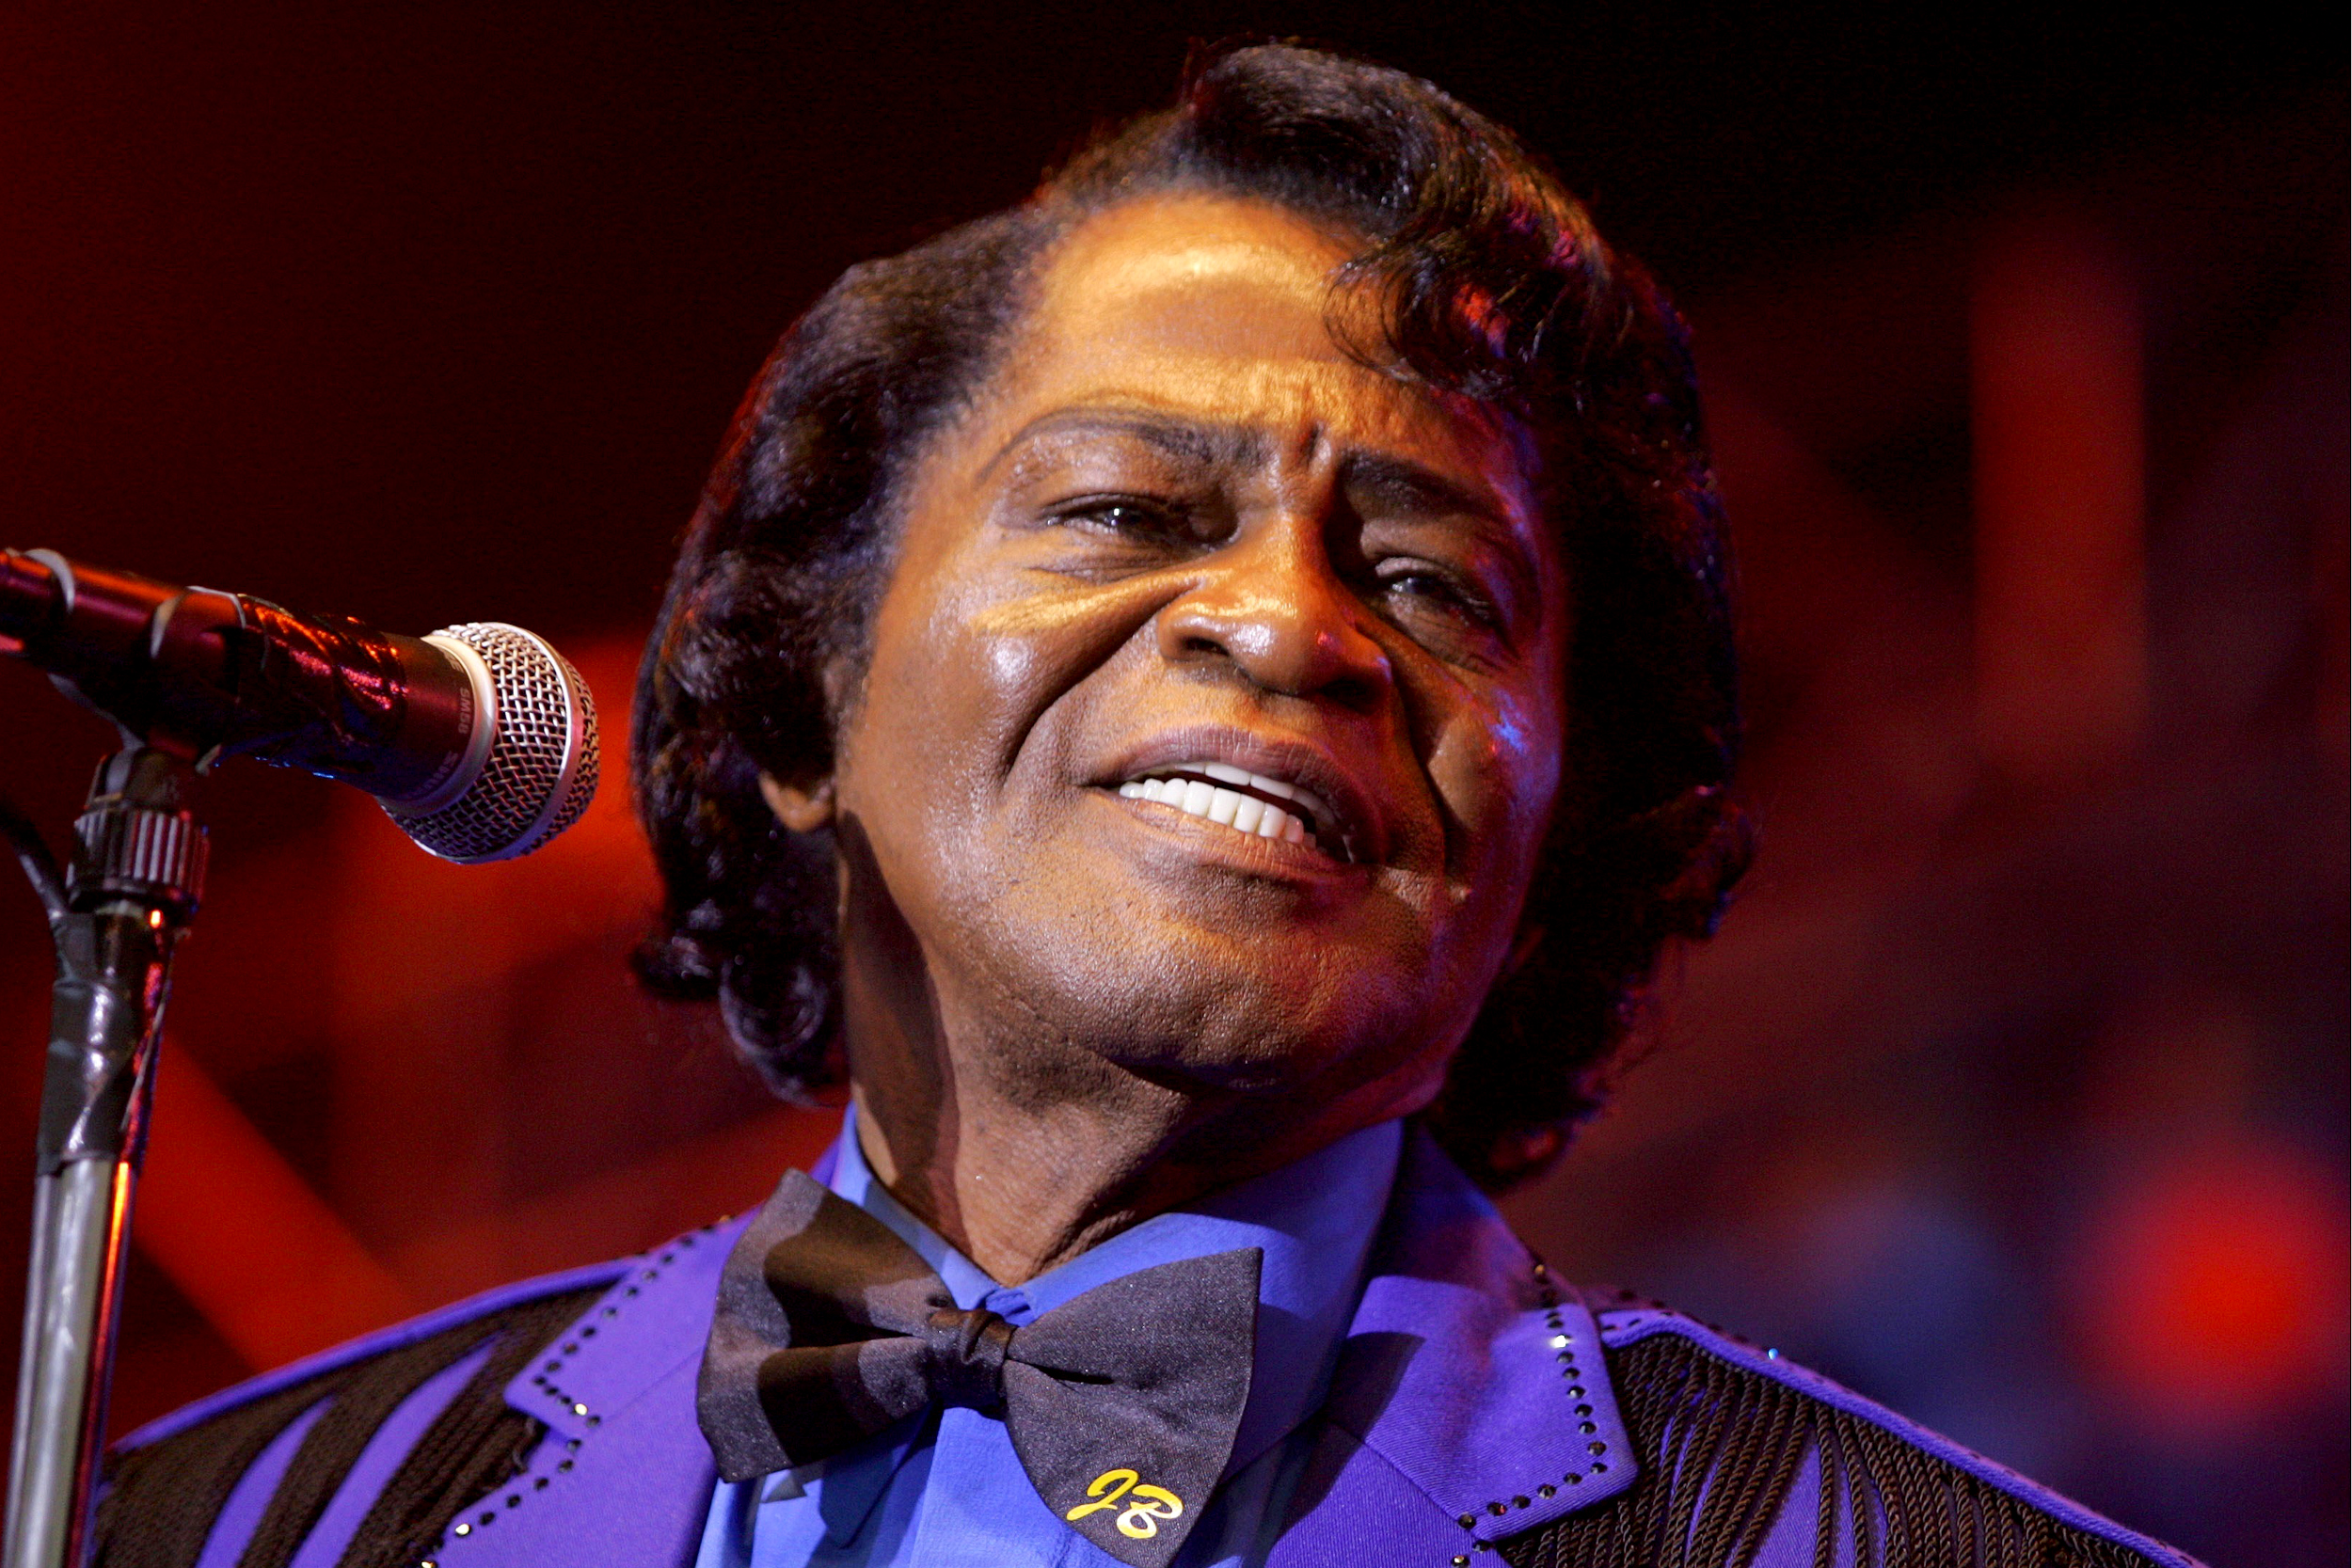 After His Death in 2006 James Brown’s Body Met a Tragic Fate & Was Relocated 14 Times.